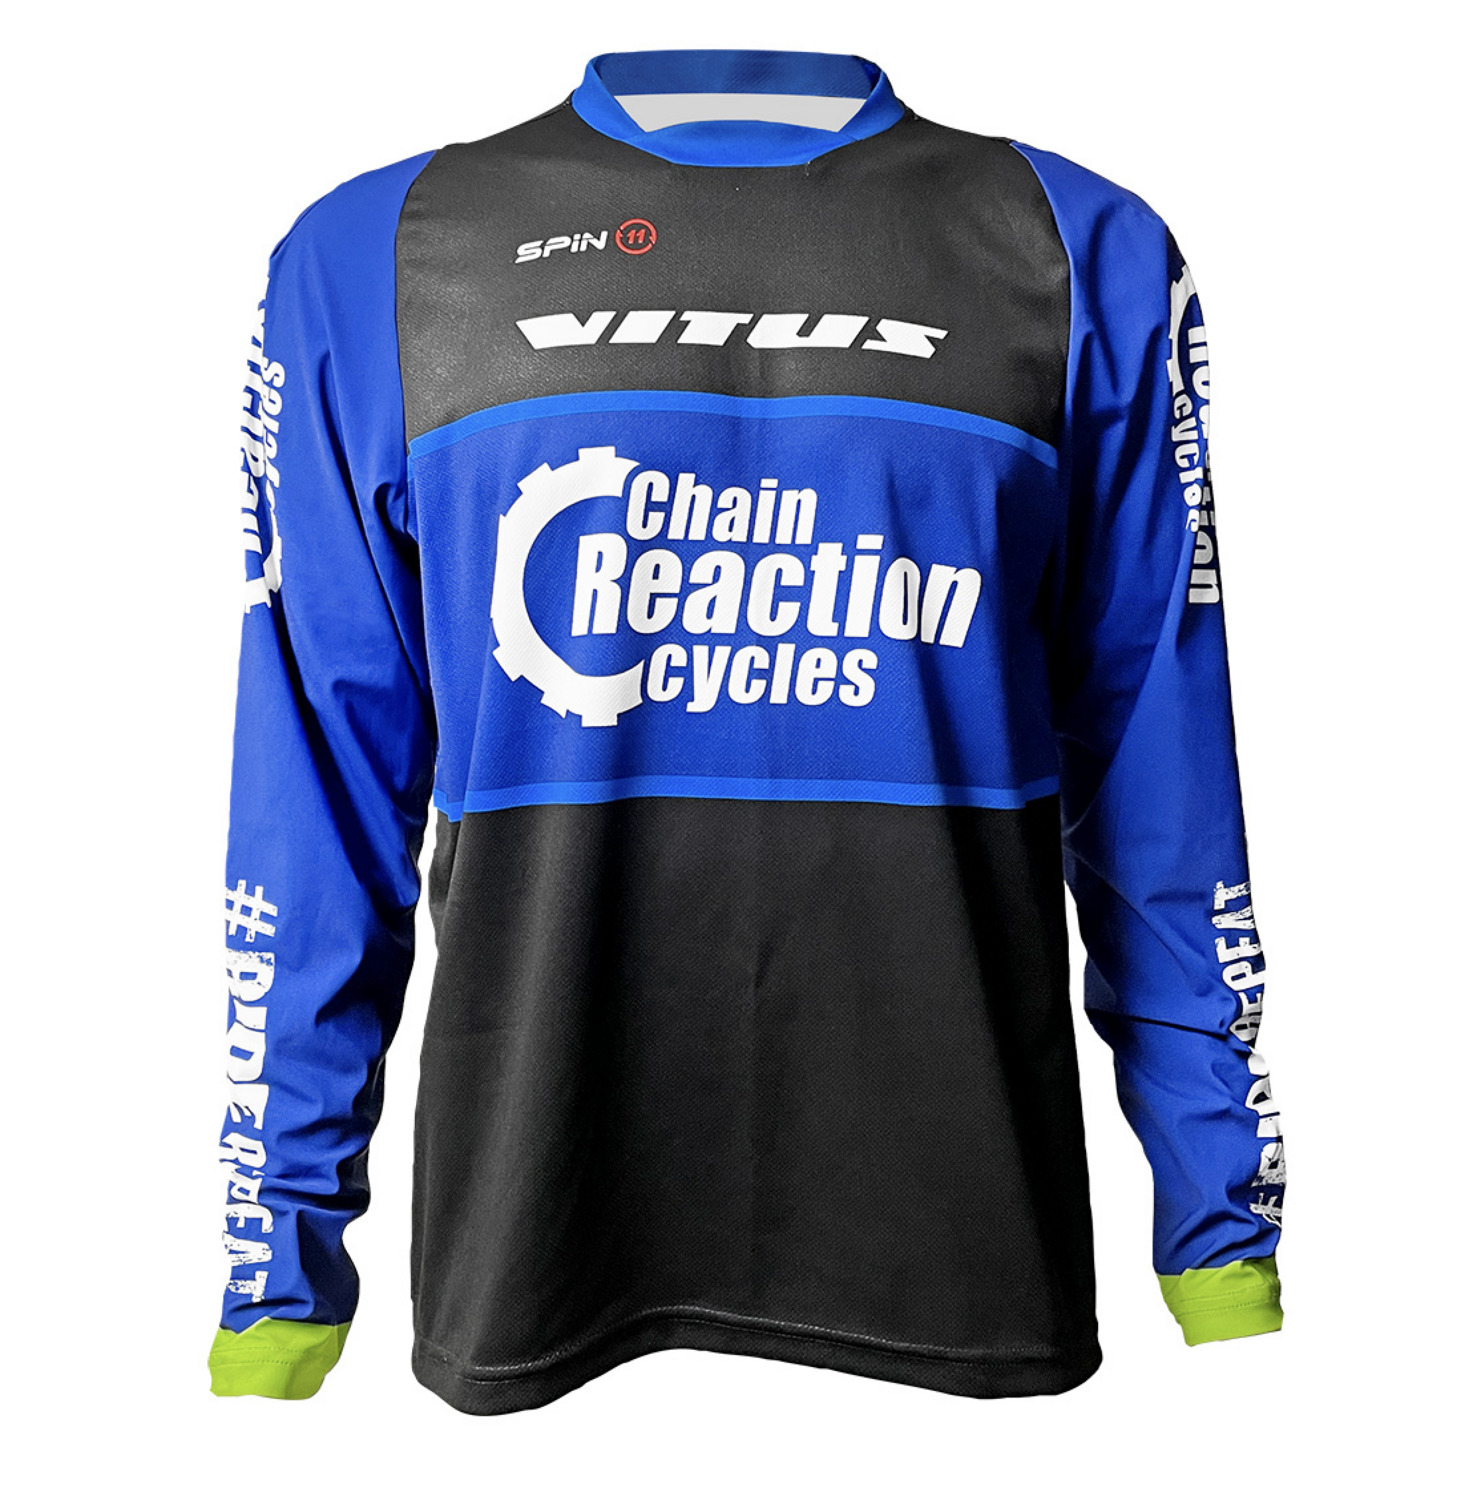 Clearance - Limited Edition Enduro Jersey Chain reaction/Vitus